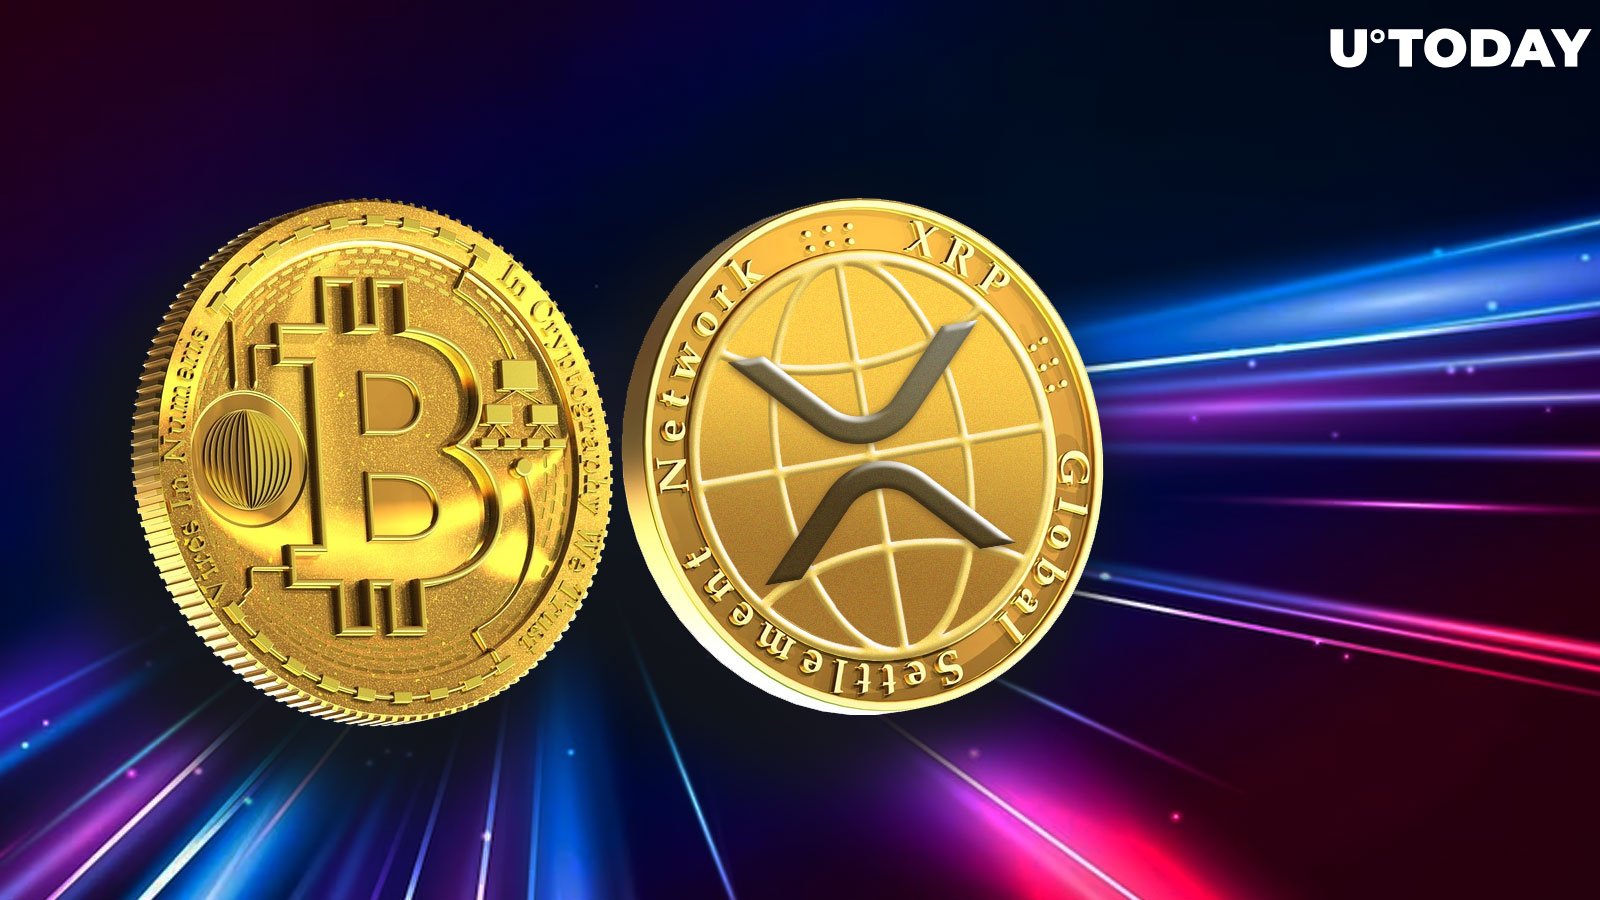 Bitcoin and XRP Are Centralized, Crypto Executive Says